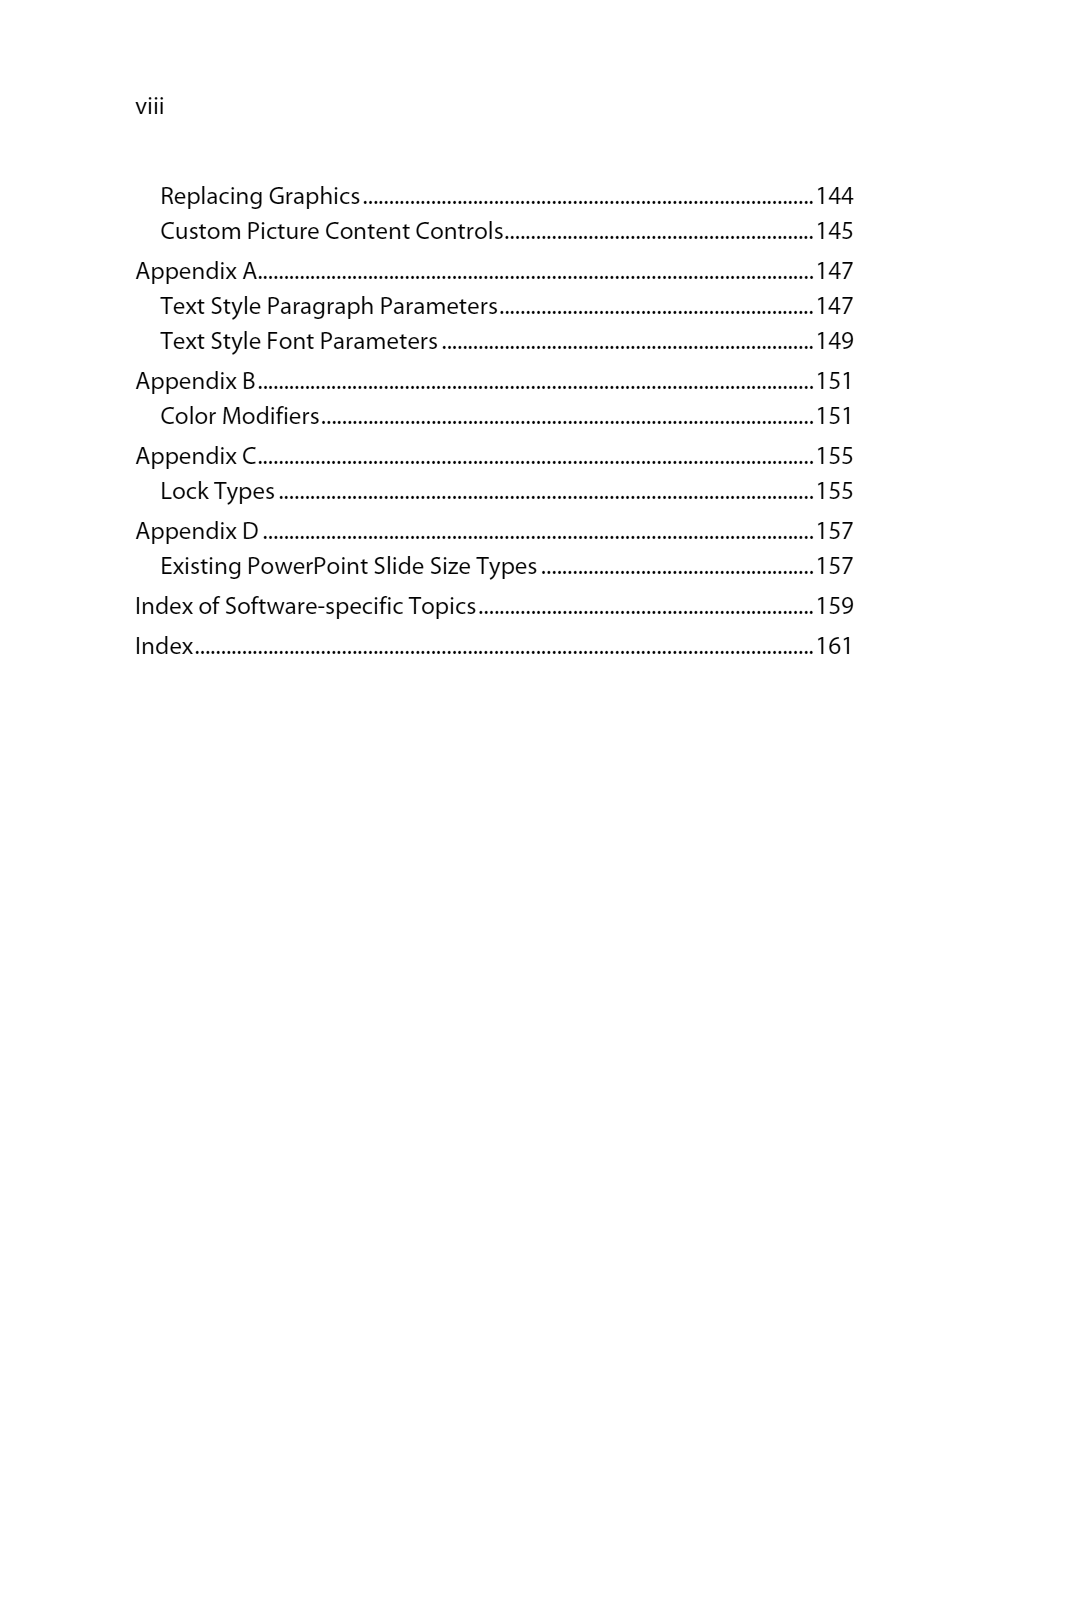 Table of Contents 3